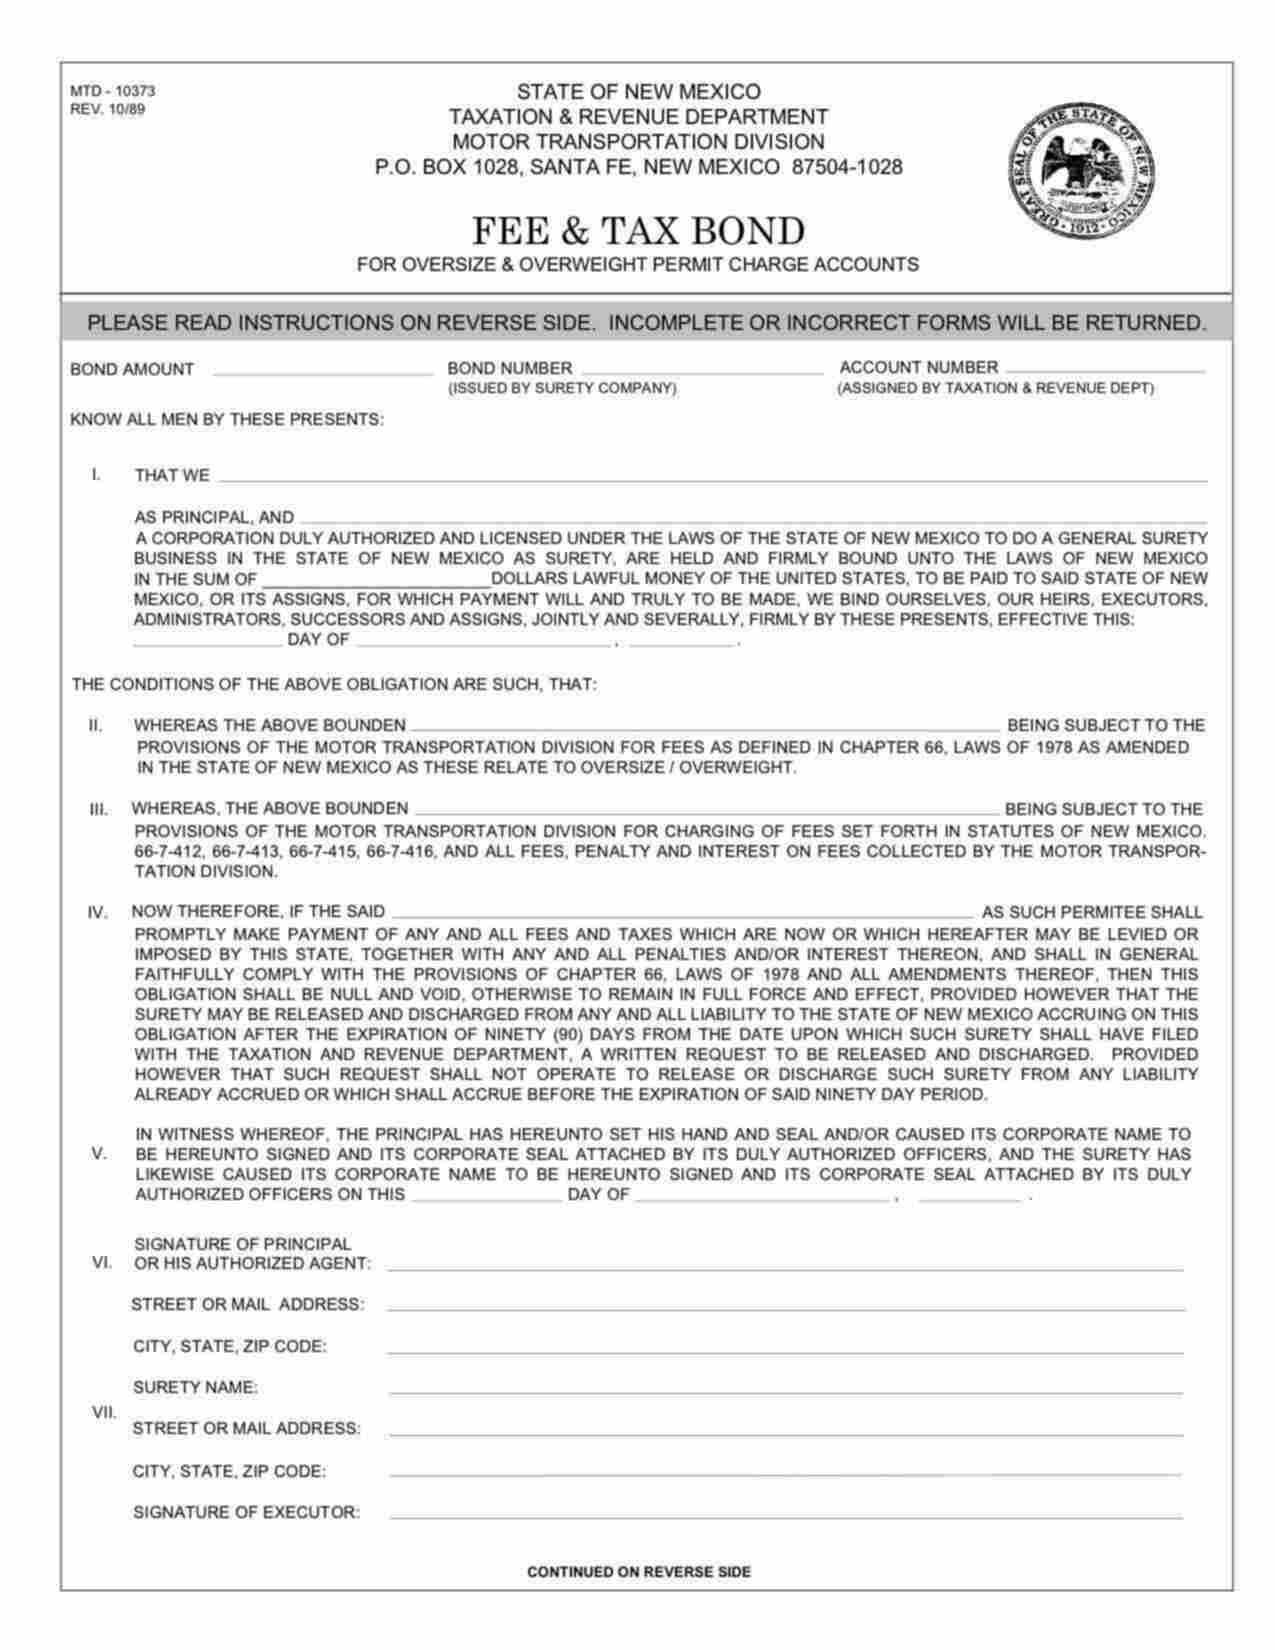 New Mexico Oversize & Overweight Permit Fee & Tax Bond Form